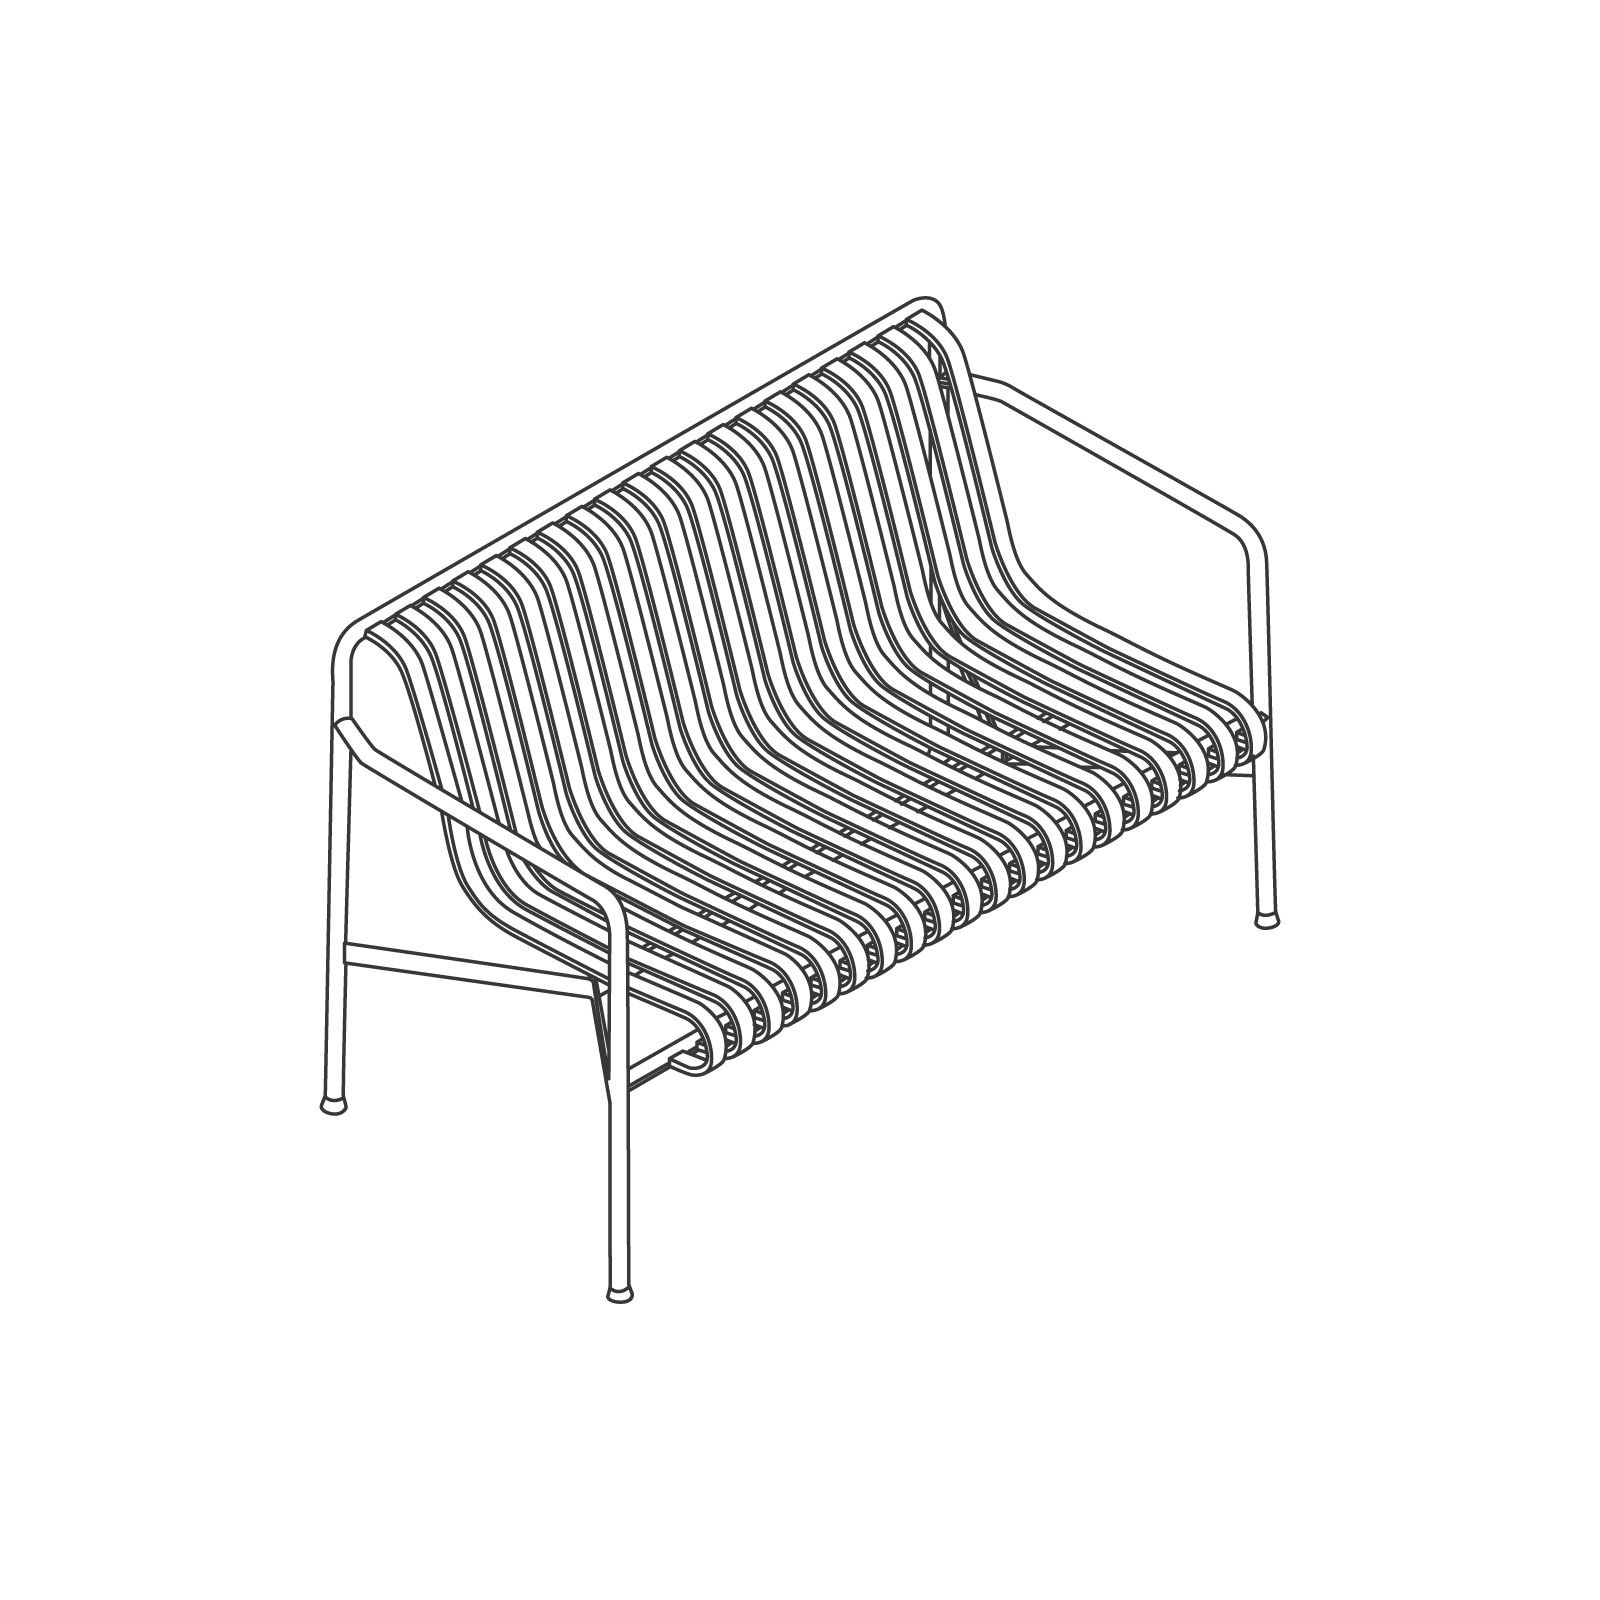 A line drawing - Palissade Dining Bench–With Arms